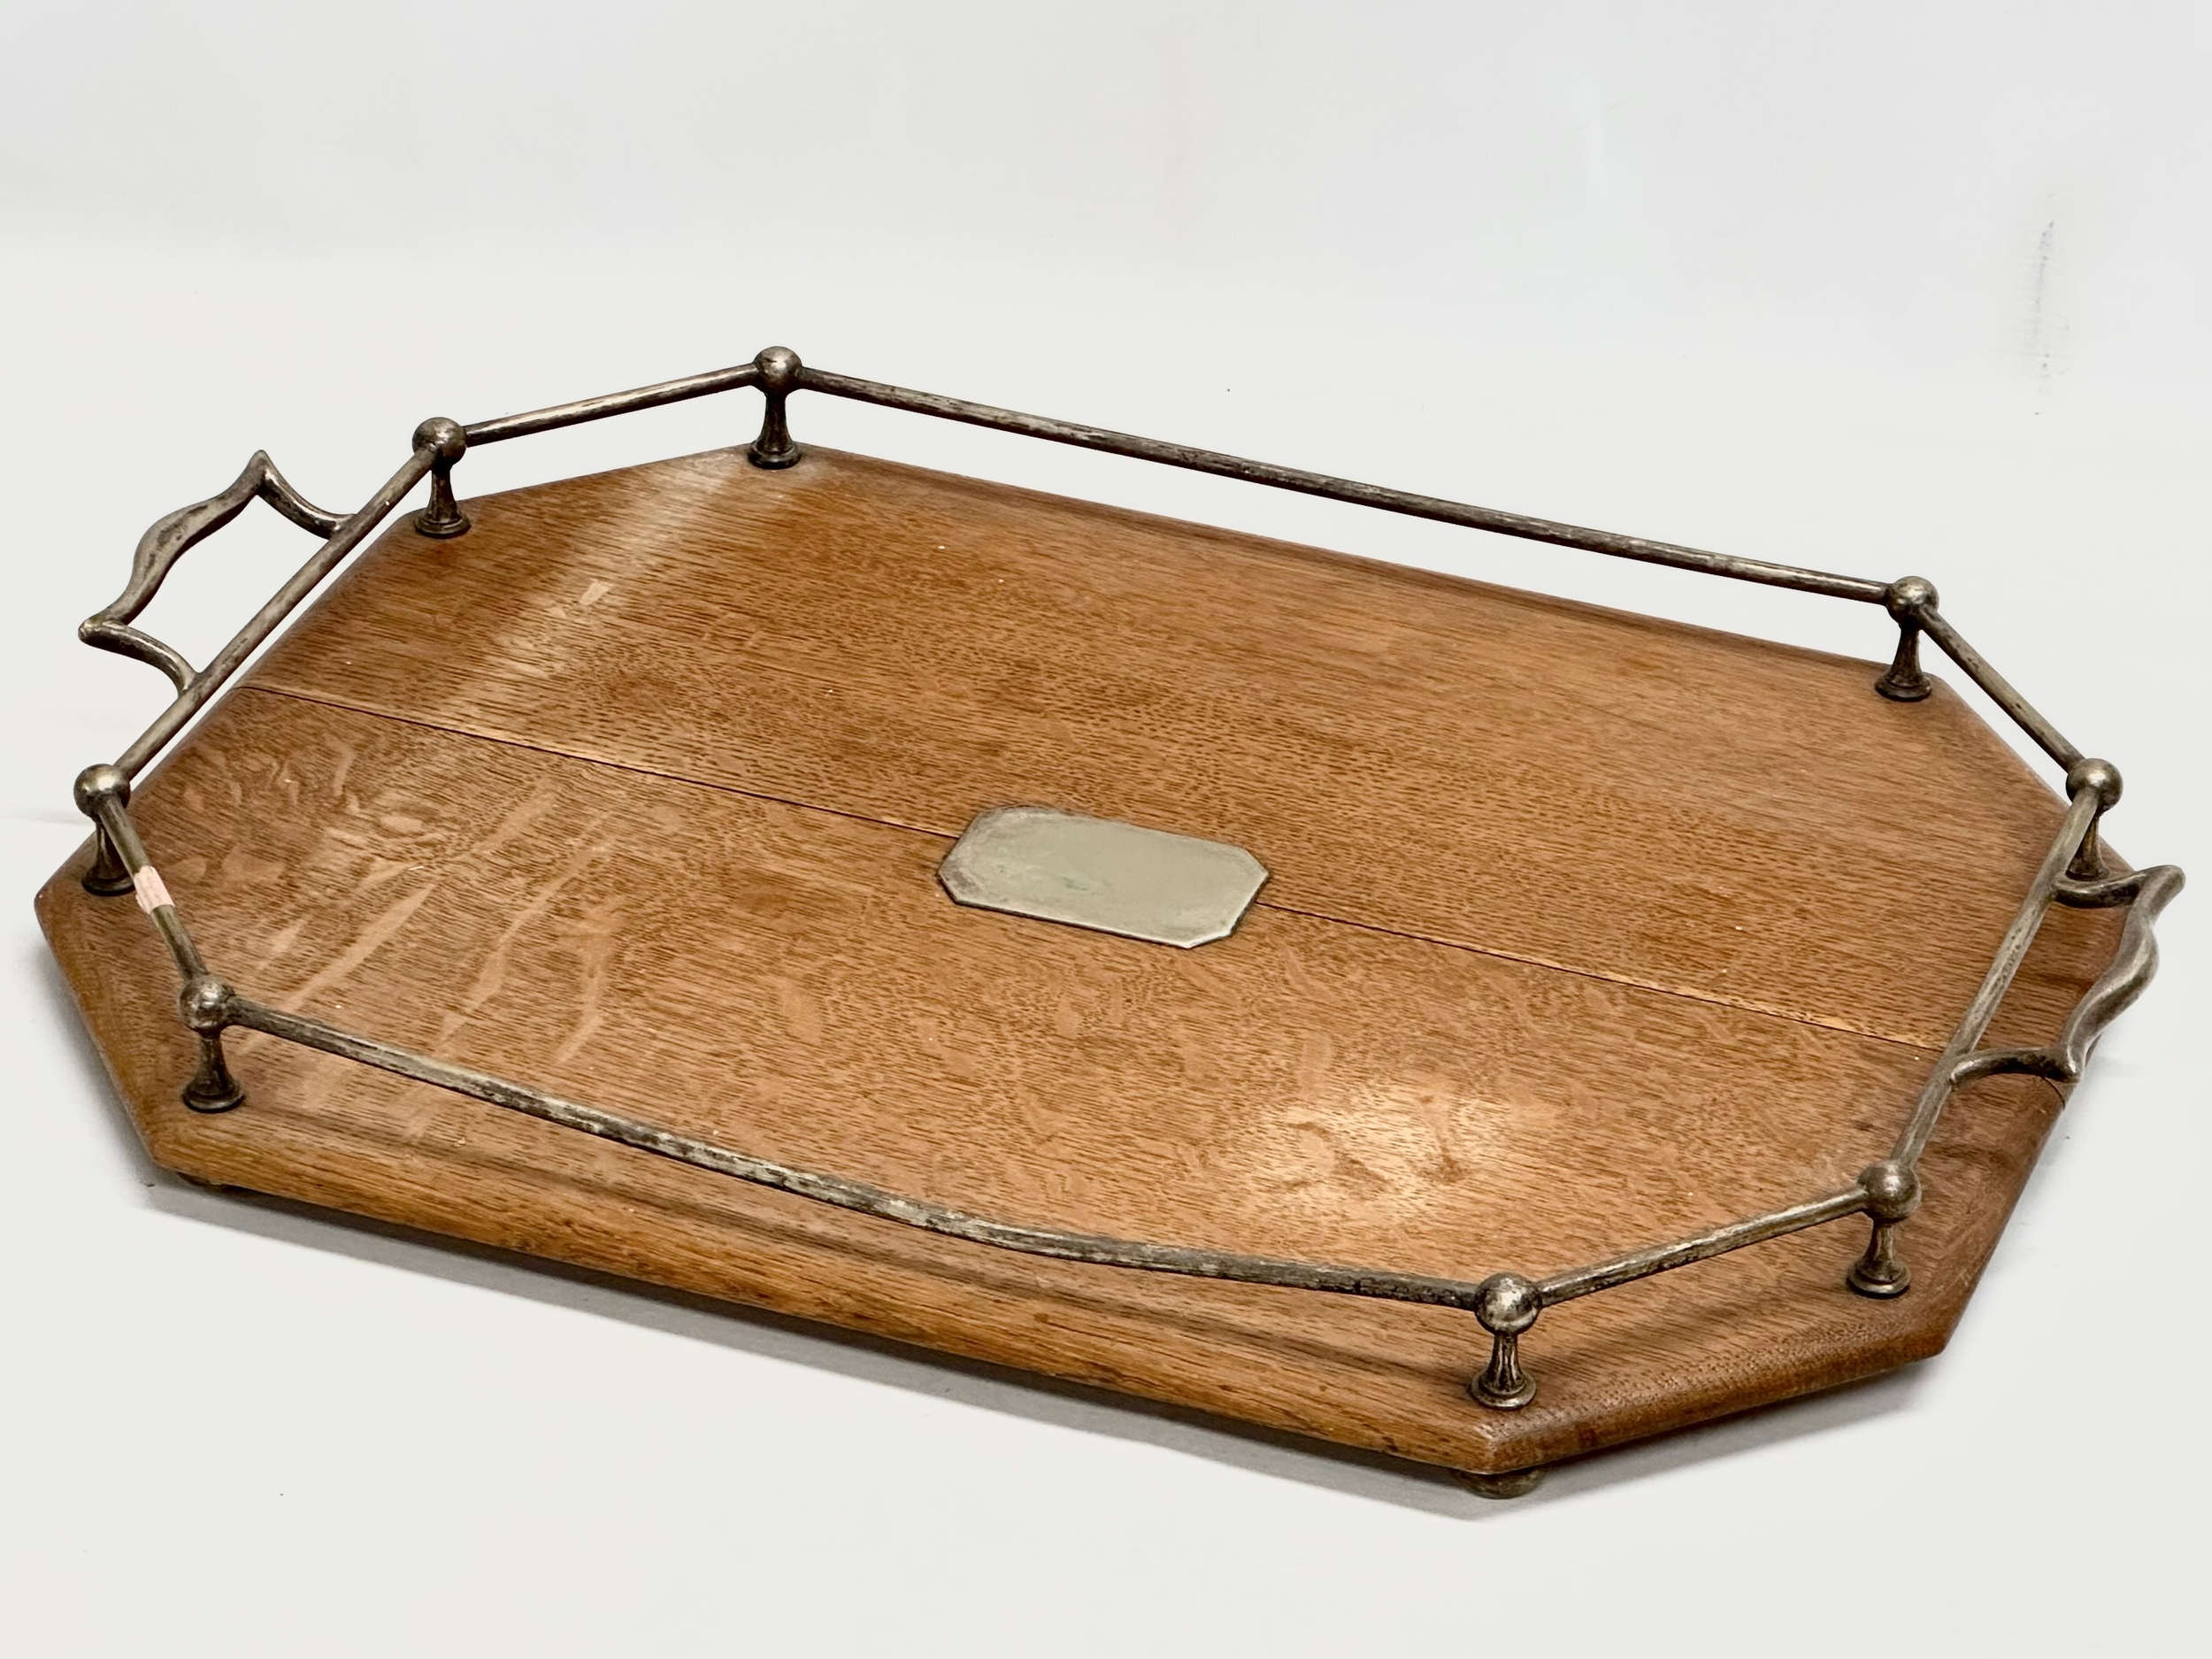 An Early 20th Century oak and silver plated serving tray. Circa 1910-1920. 55x50x7cm